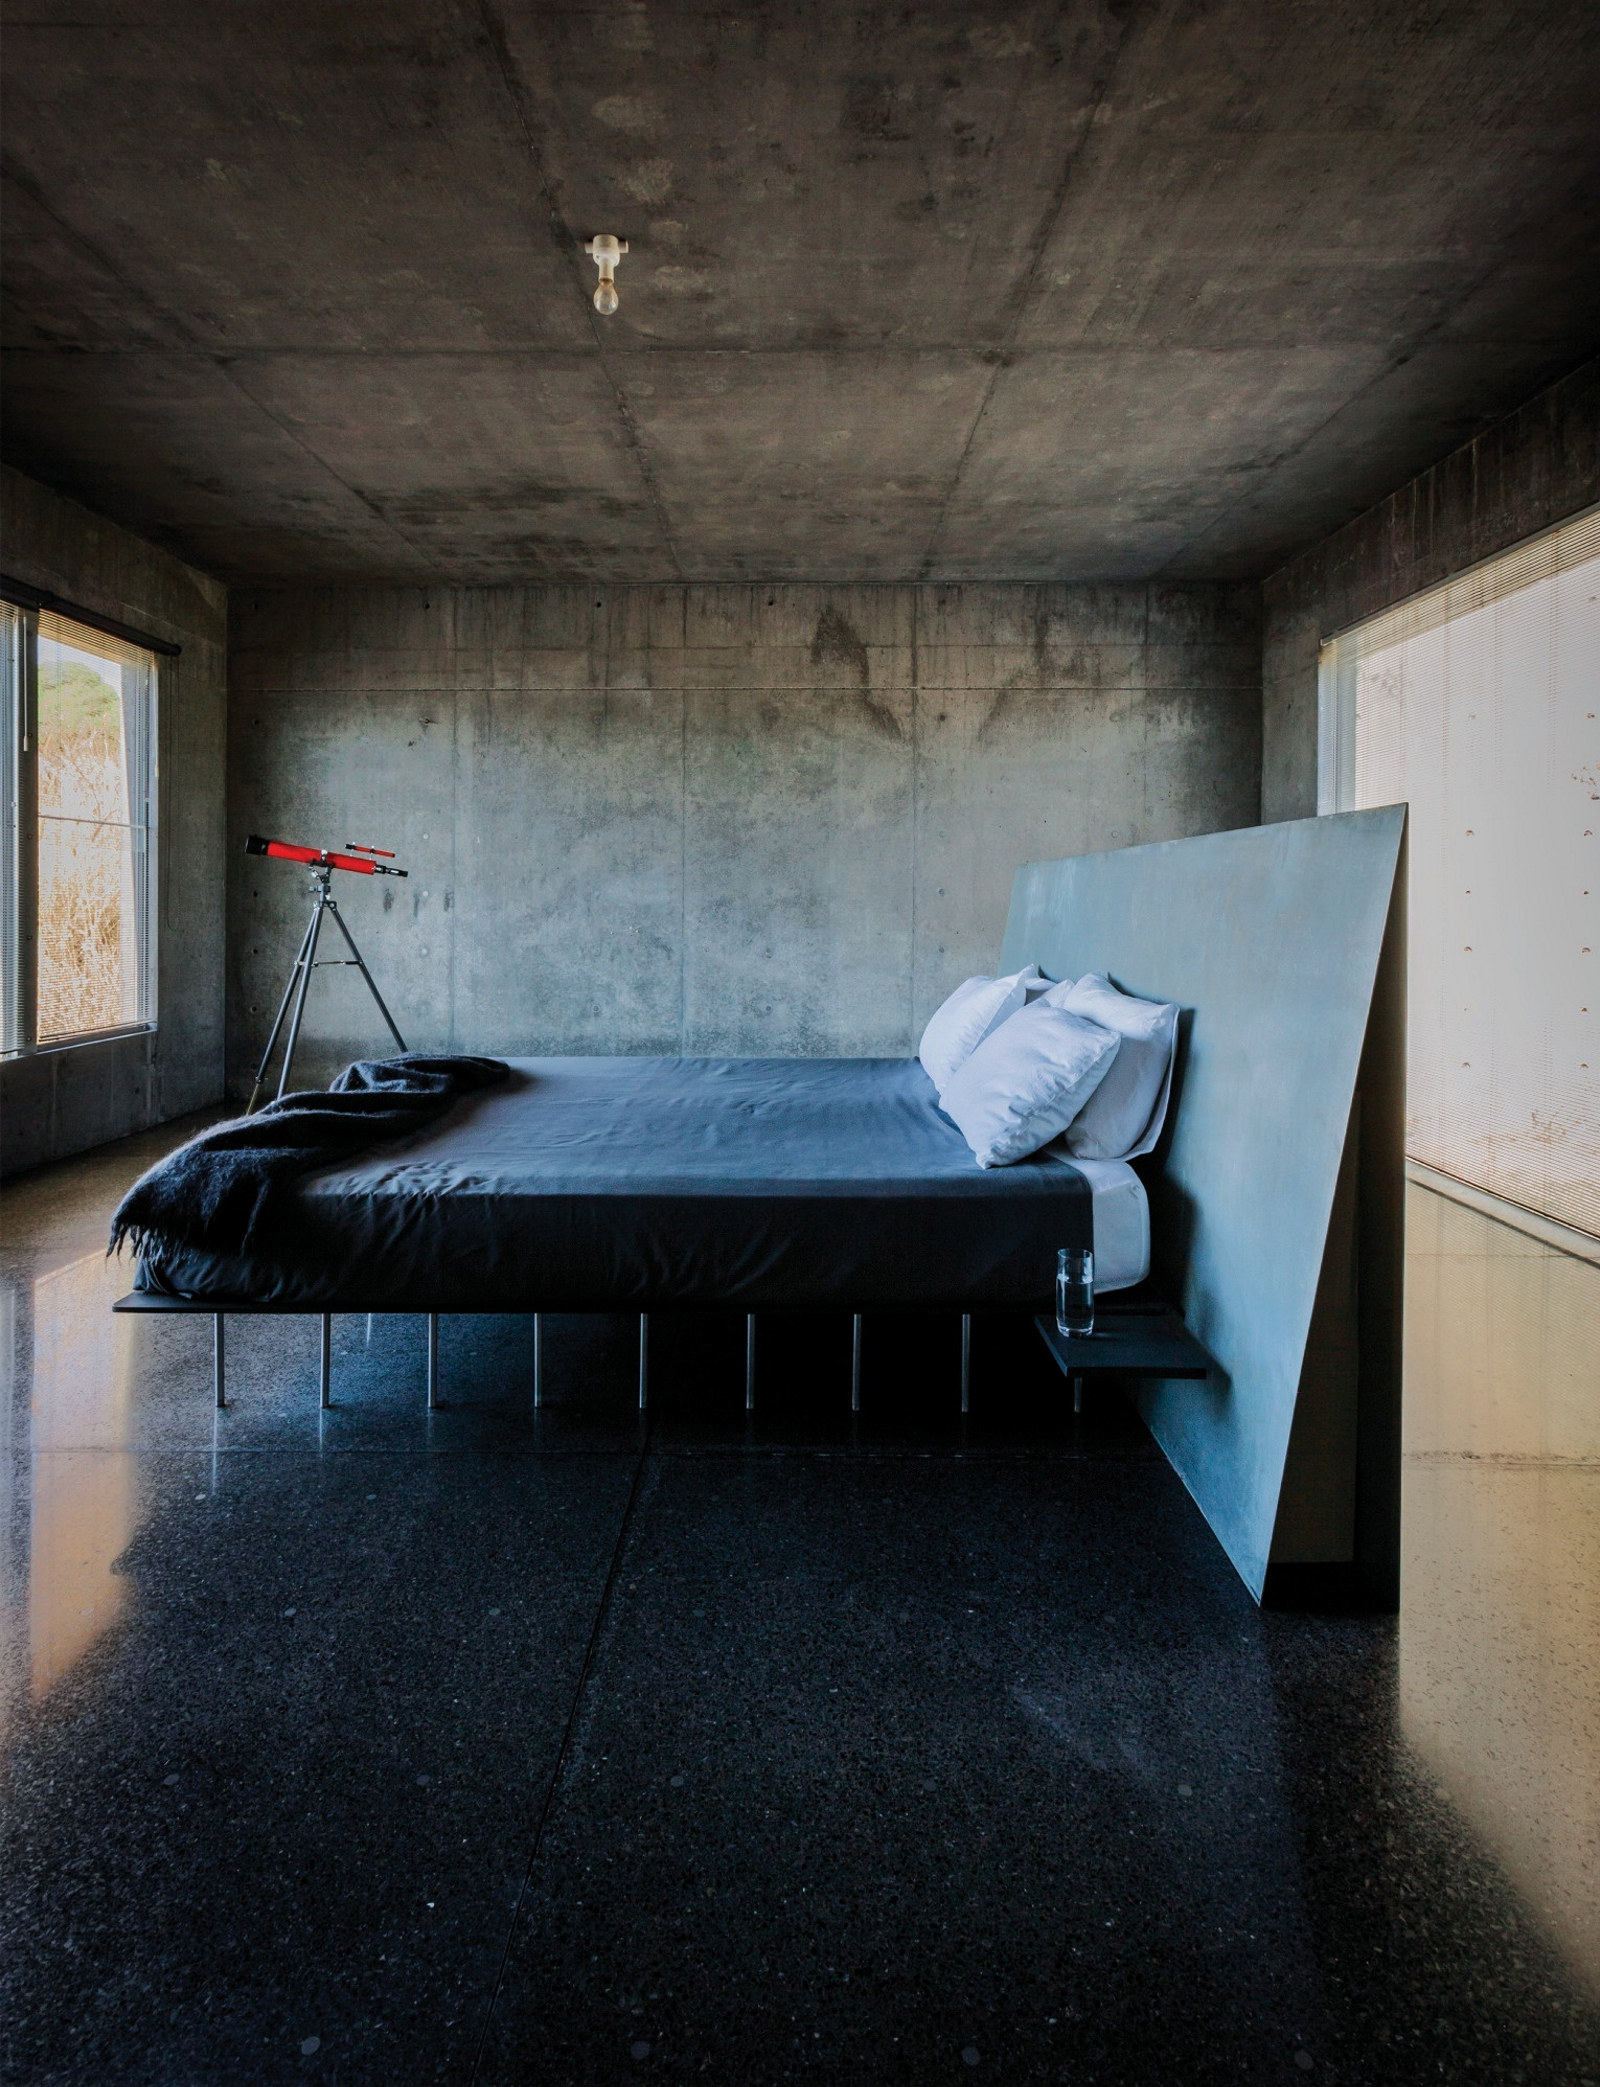 This is a photograph of a bedroom with a polished concrete floor with a concrete ceiling and large windows facing the double bed in the centre of the room